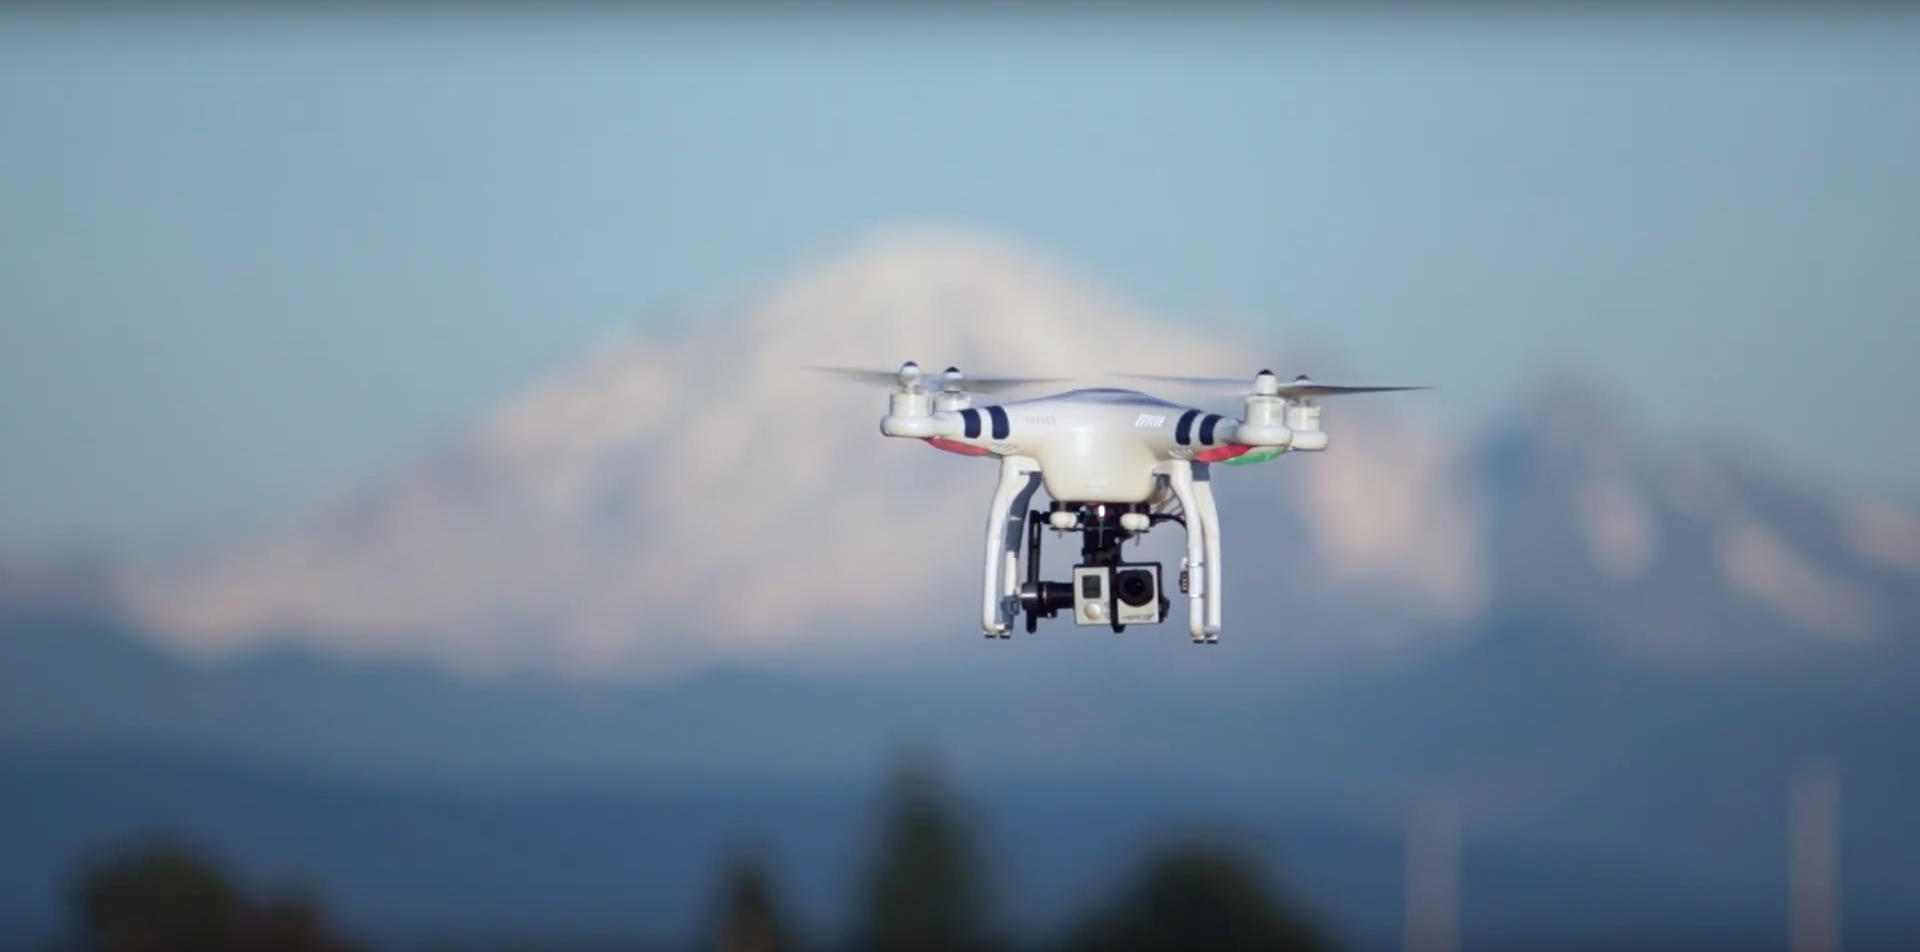 The drone used to film the video, in front of Mt. Baker